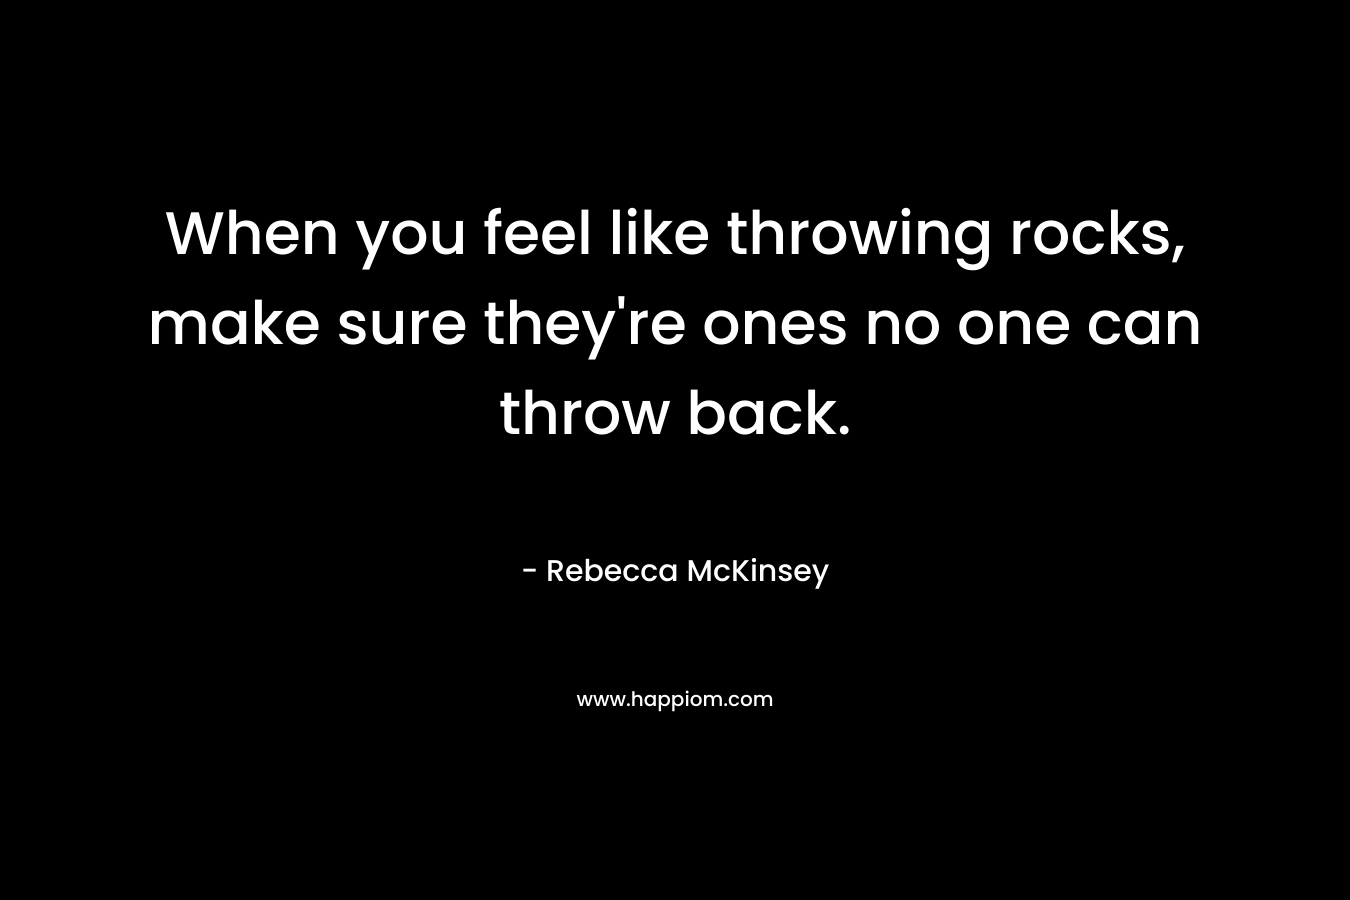 When you feel like throwing rocks, make sure they’re ones no one can throw back. – Rebecca McKinsey